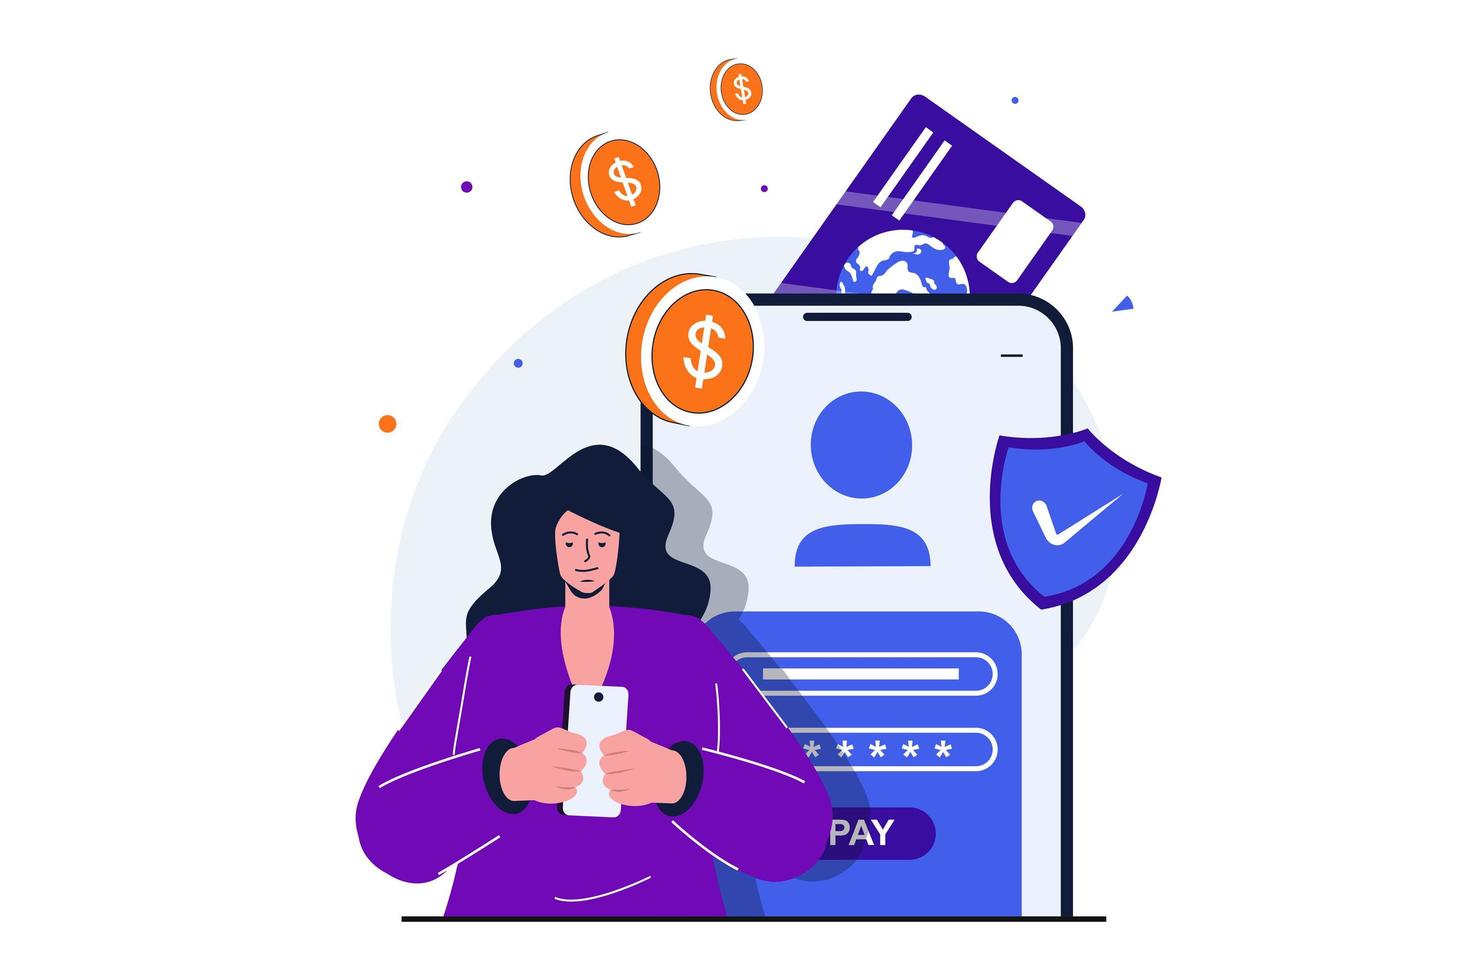 Secure payment modern flat concept for web banner design. Woman logs into online banking account using password and manages her credit card in app. Vector illustration with isolated people scene